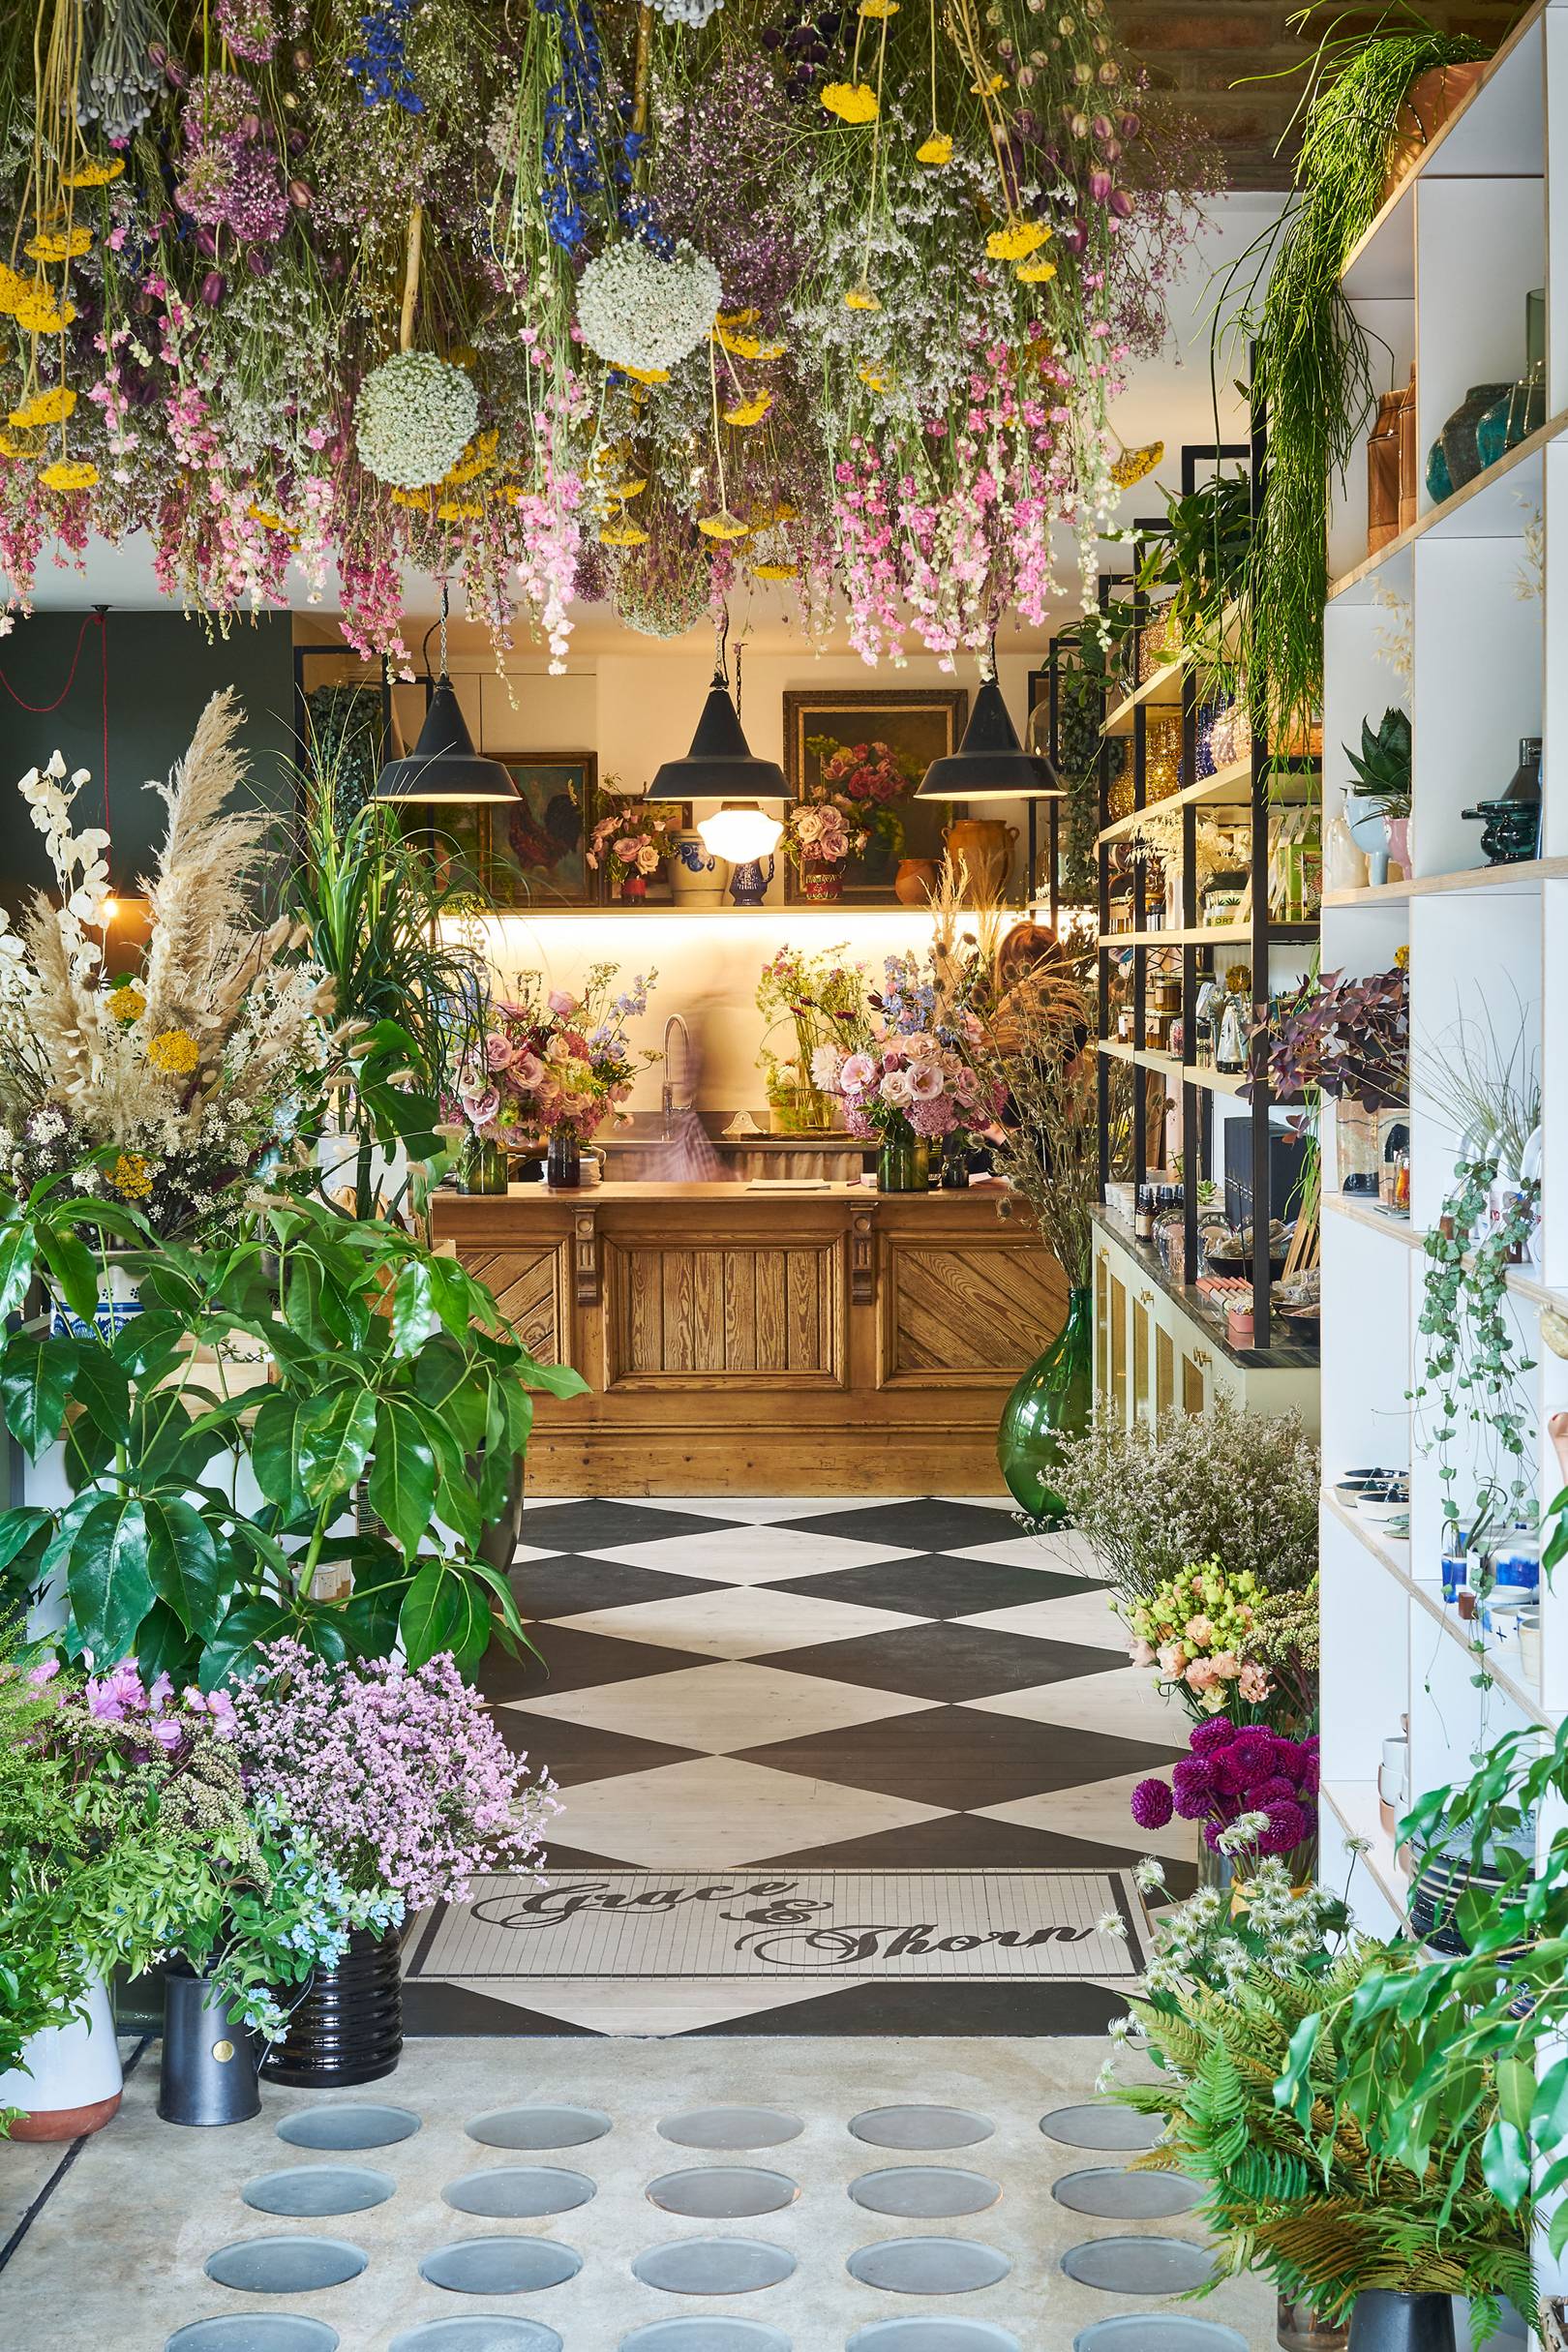 The best florists in London: 14 flower shops to shop at | CN Traveller